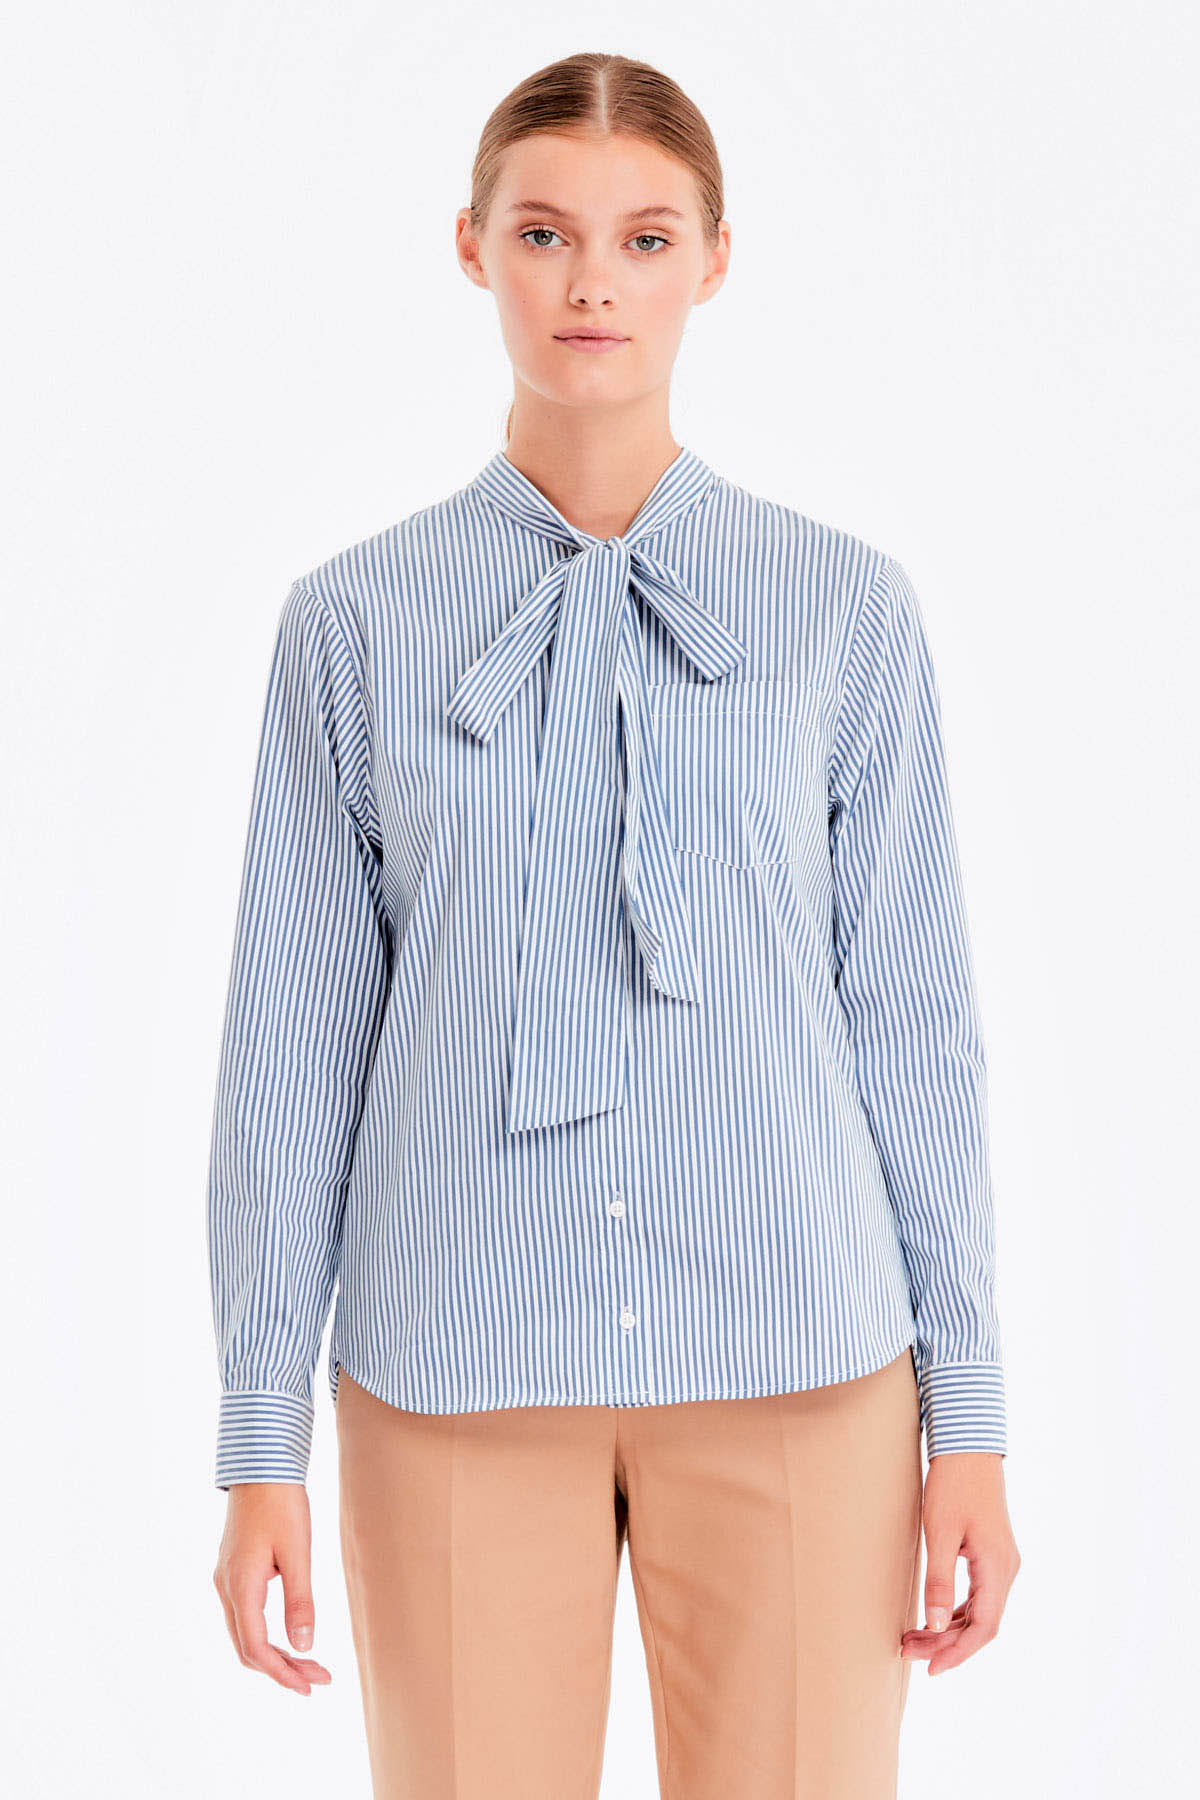 Striped shirt with a bow, photo 1